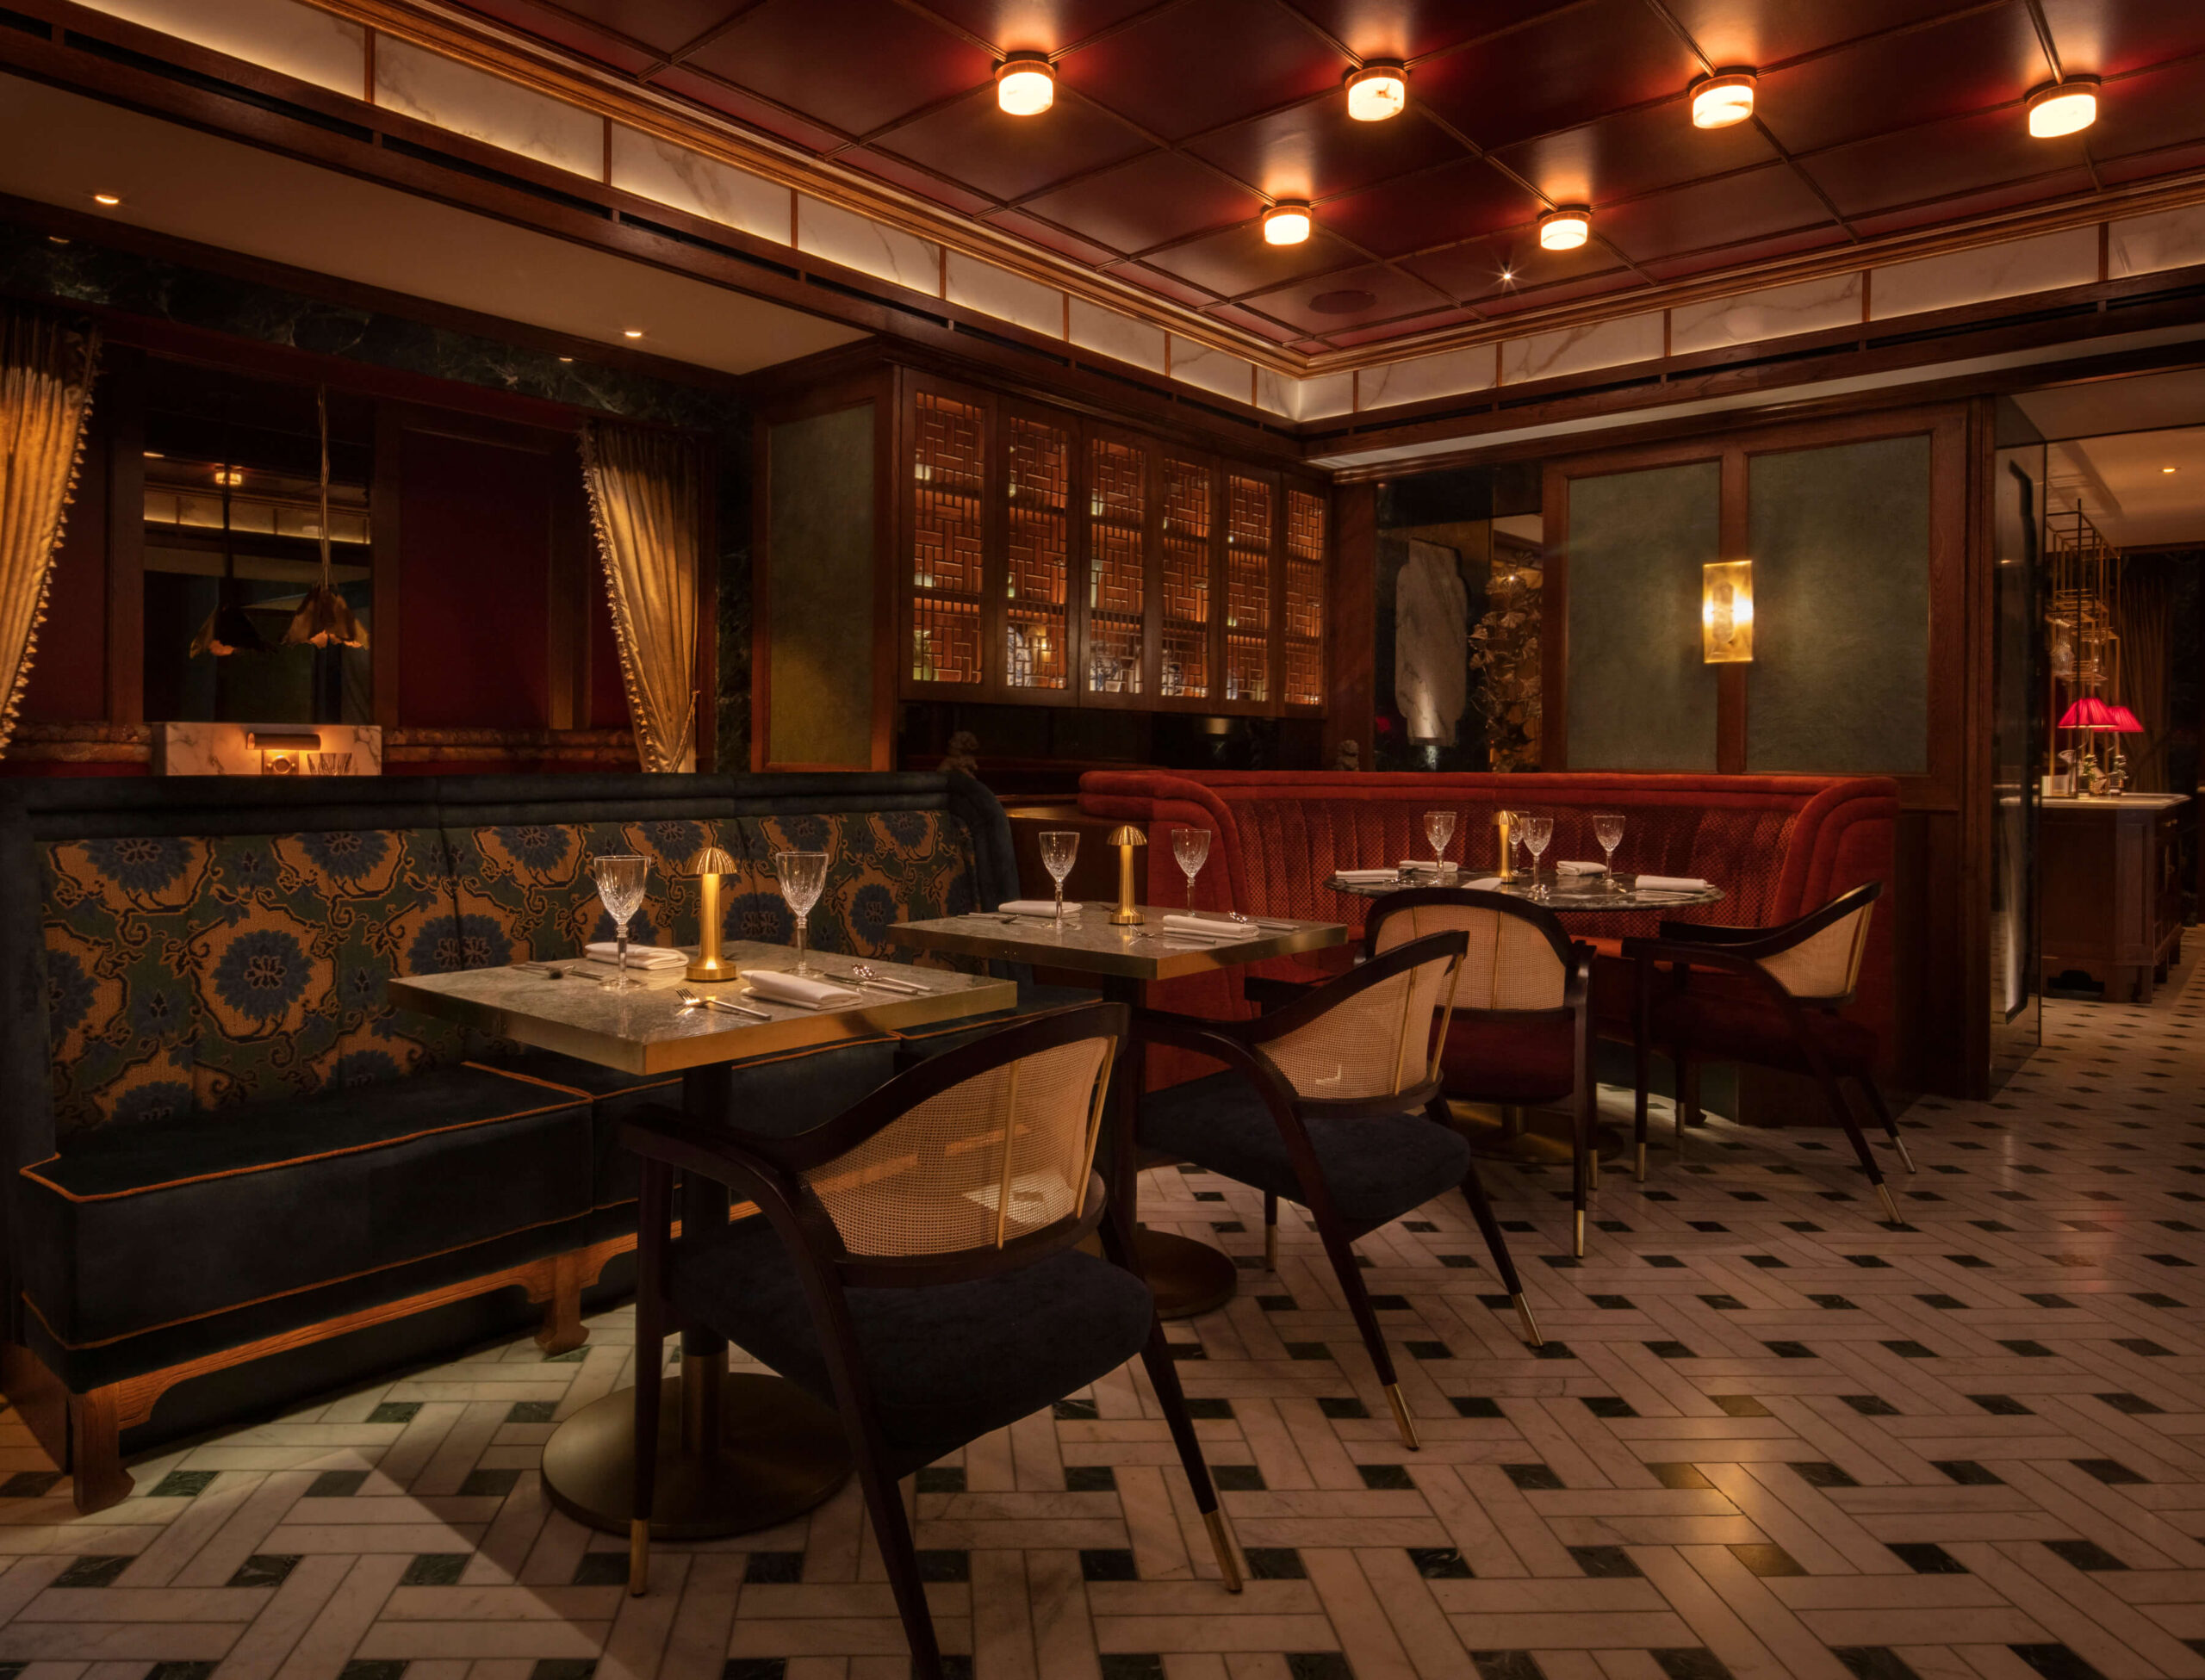 St. James' Court, A Taj Hotel Welcomes The Acclaimed House Of Ming Restaurant To London